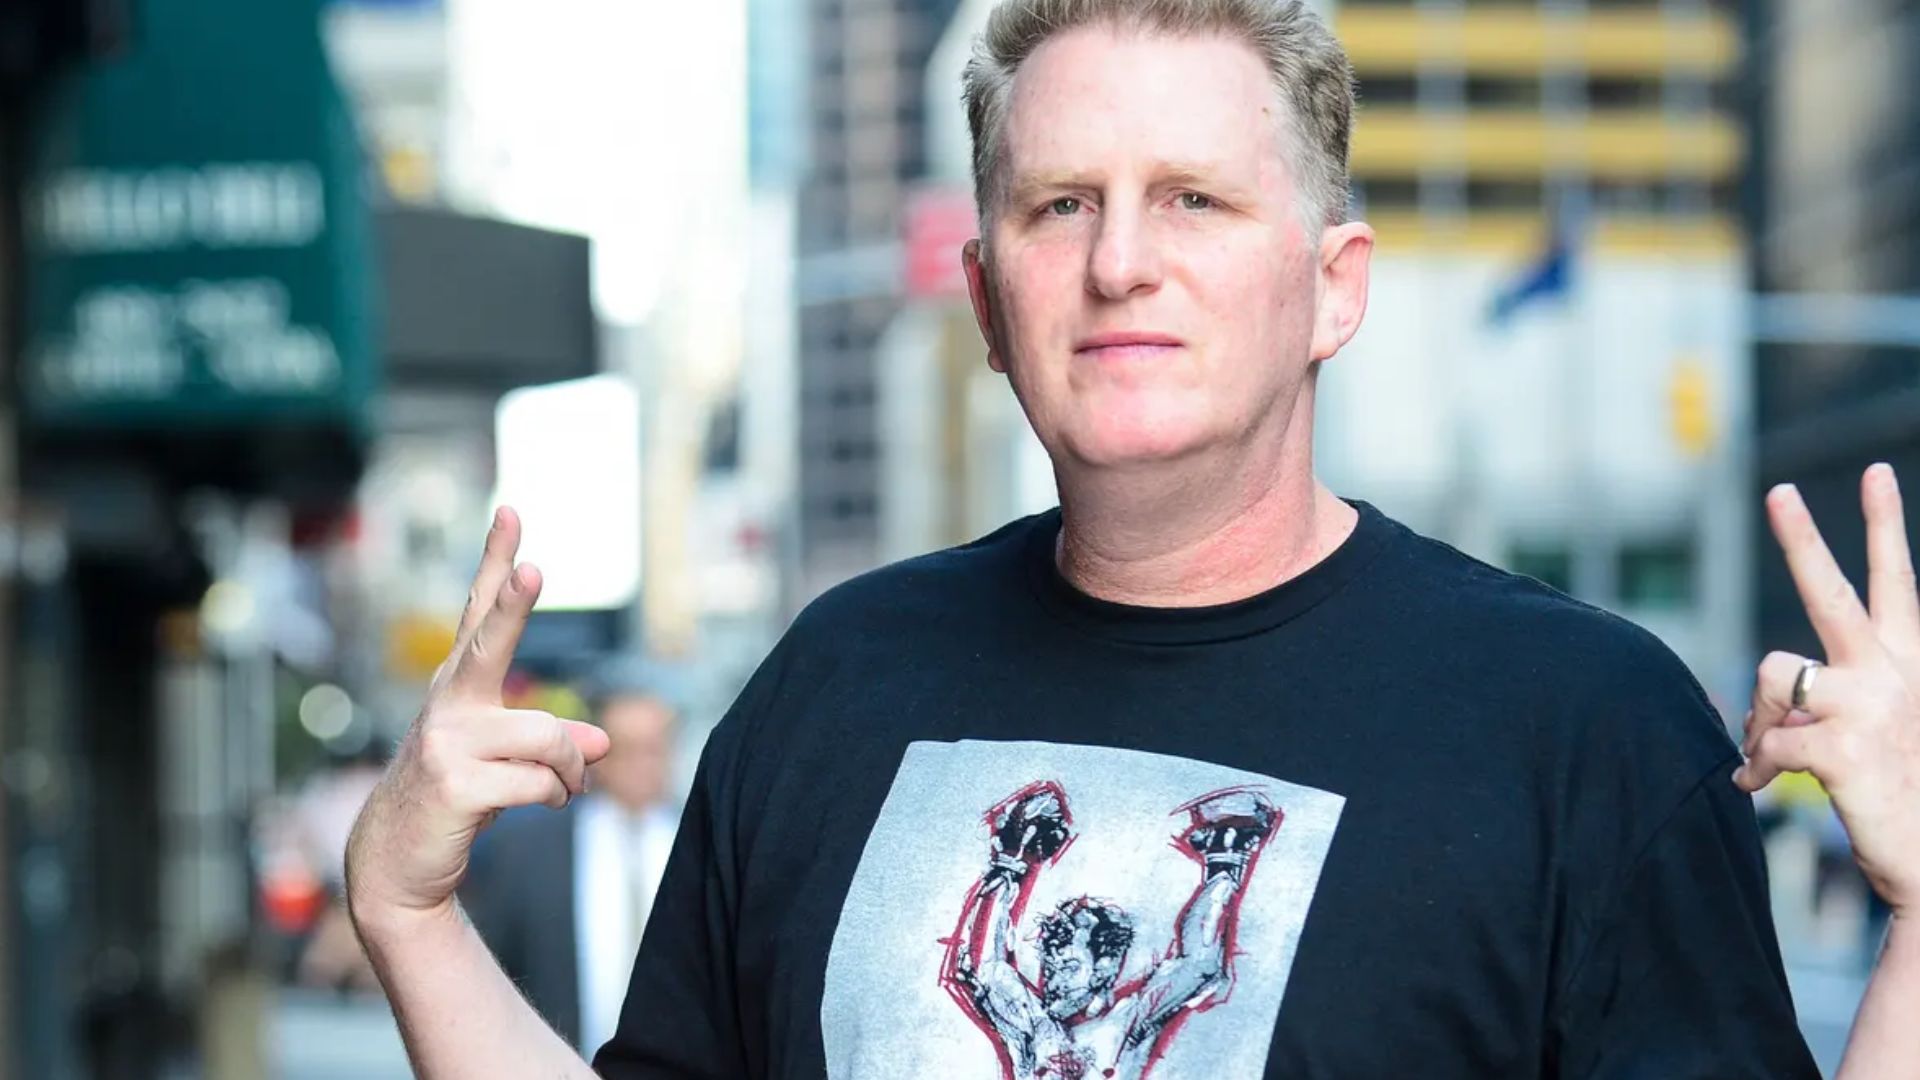 Michael Rapaport Doing The Victory Sign